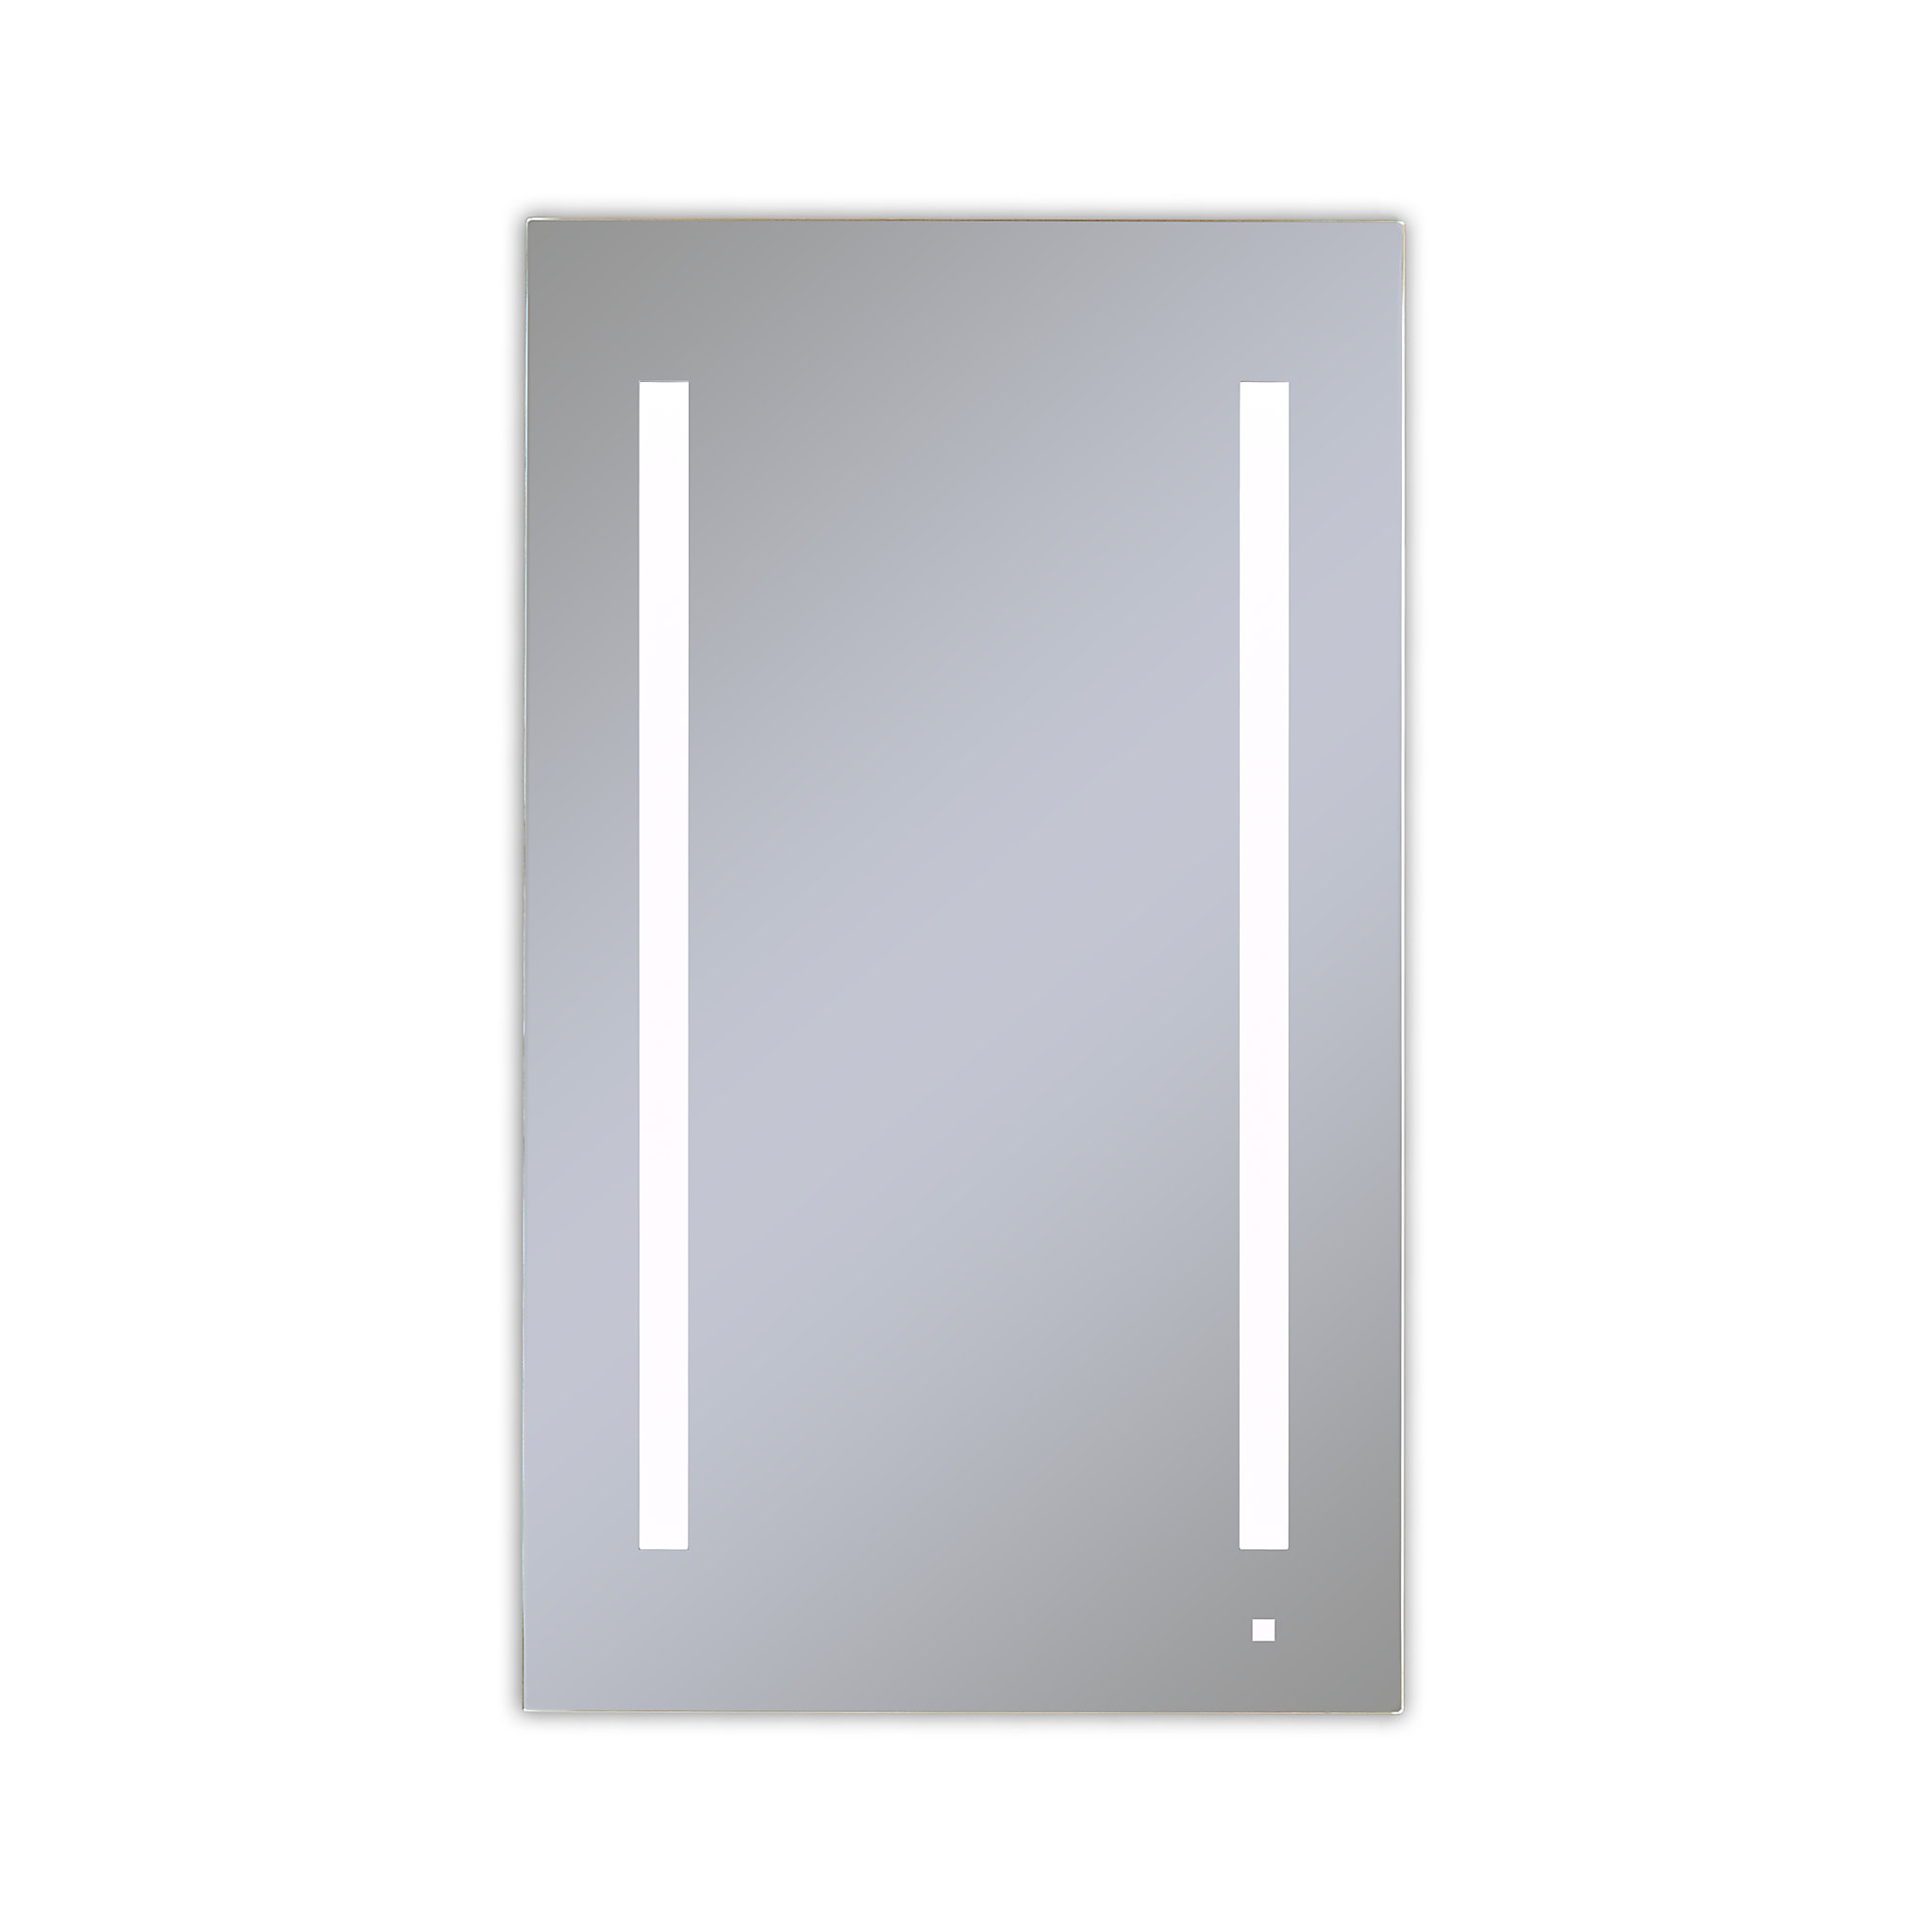 Robern AC2440D4P1L AiO Lighted Cabinet, 24" x 40" x 4", LUM Lighting, 4000K Temperature (Cool Light), Dimmable, Electrical Outle